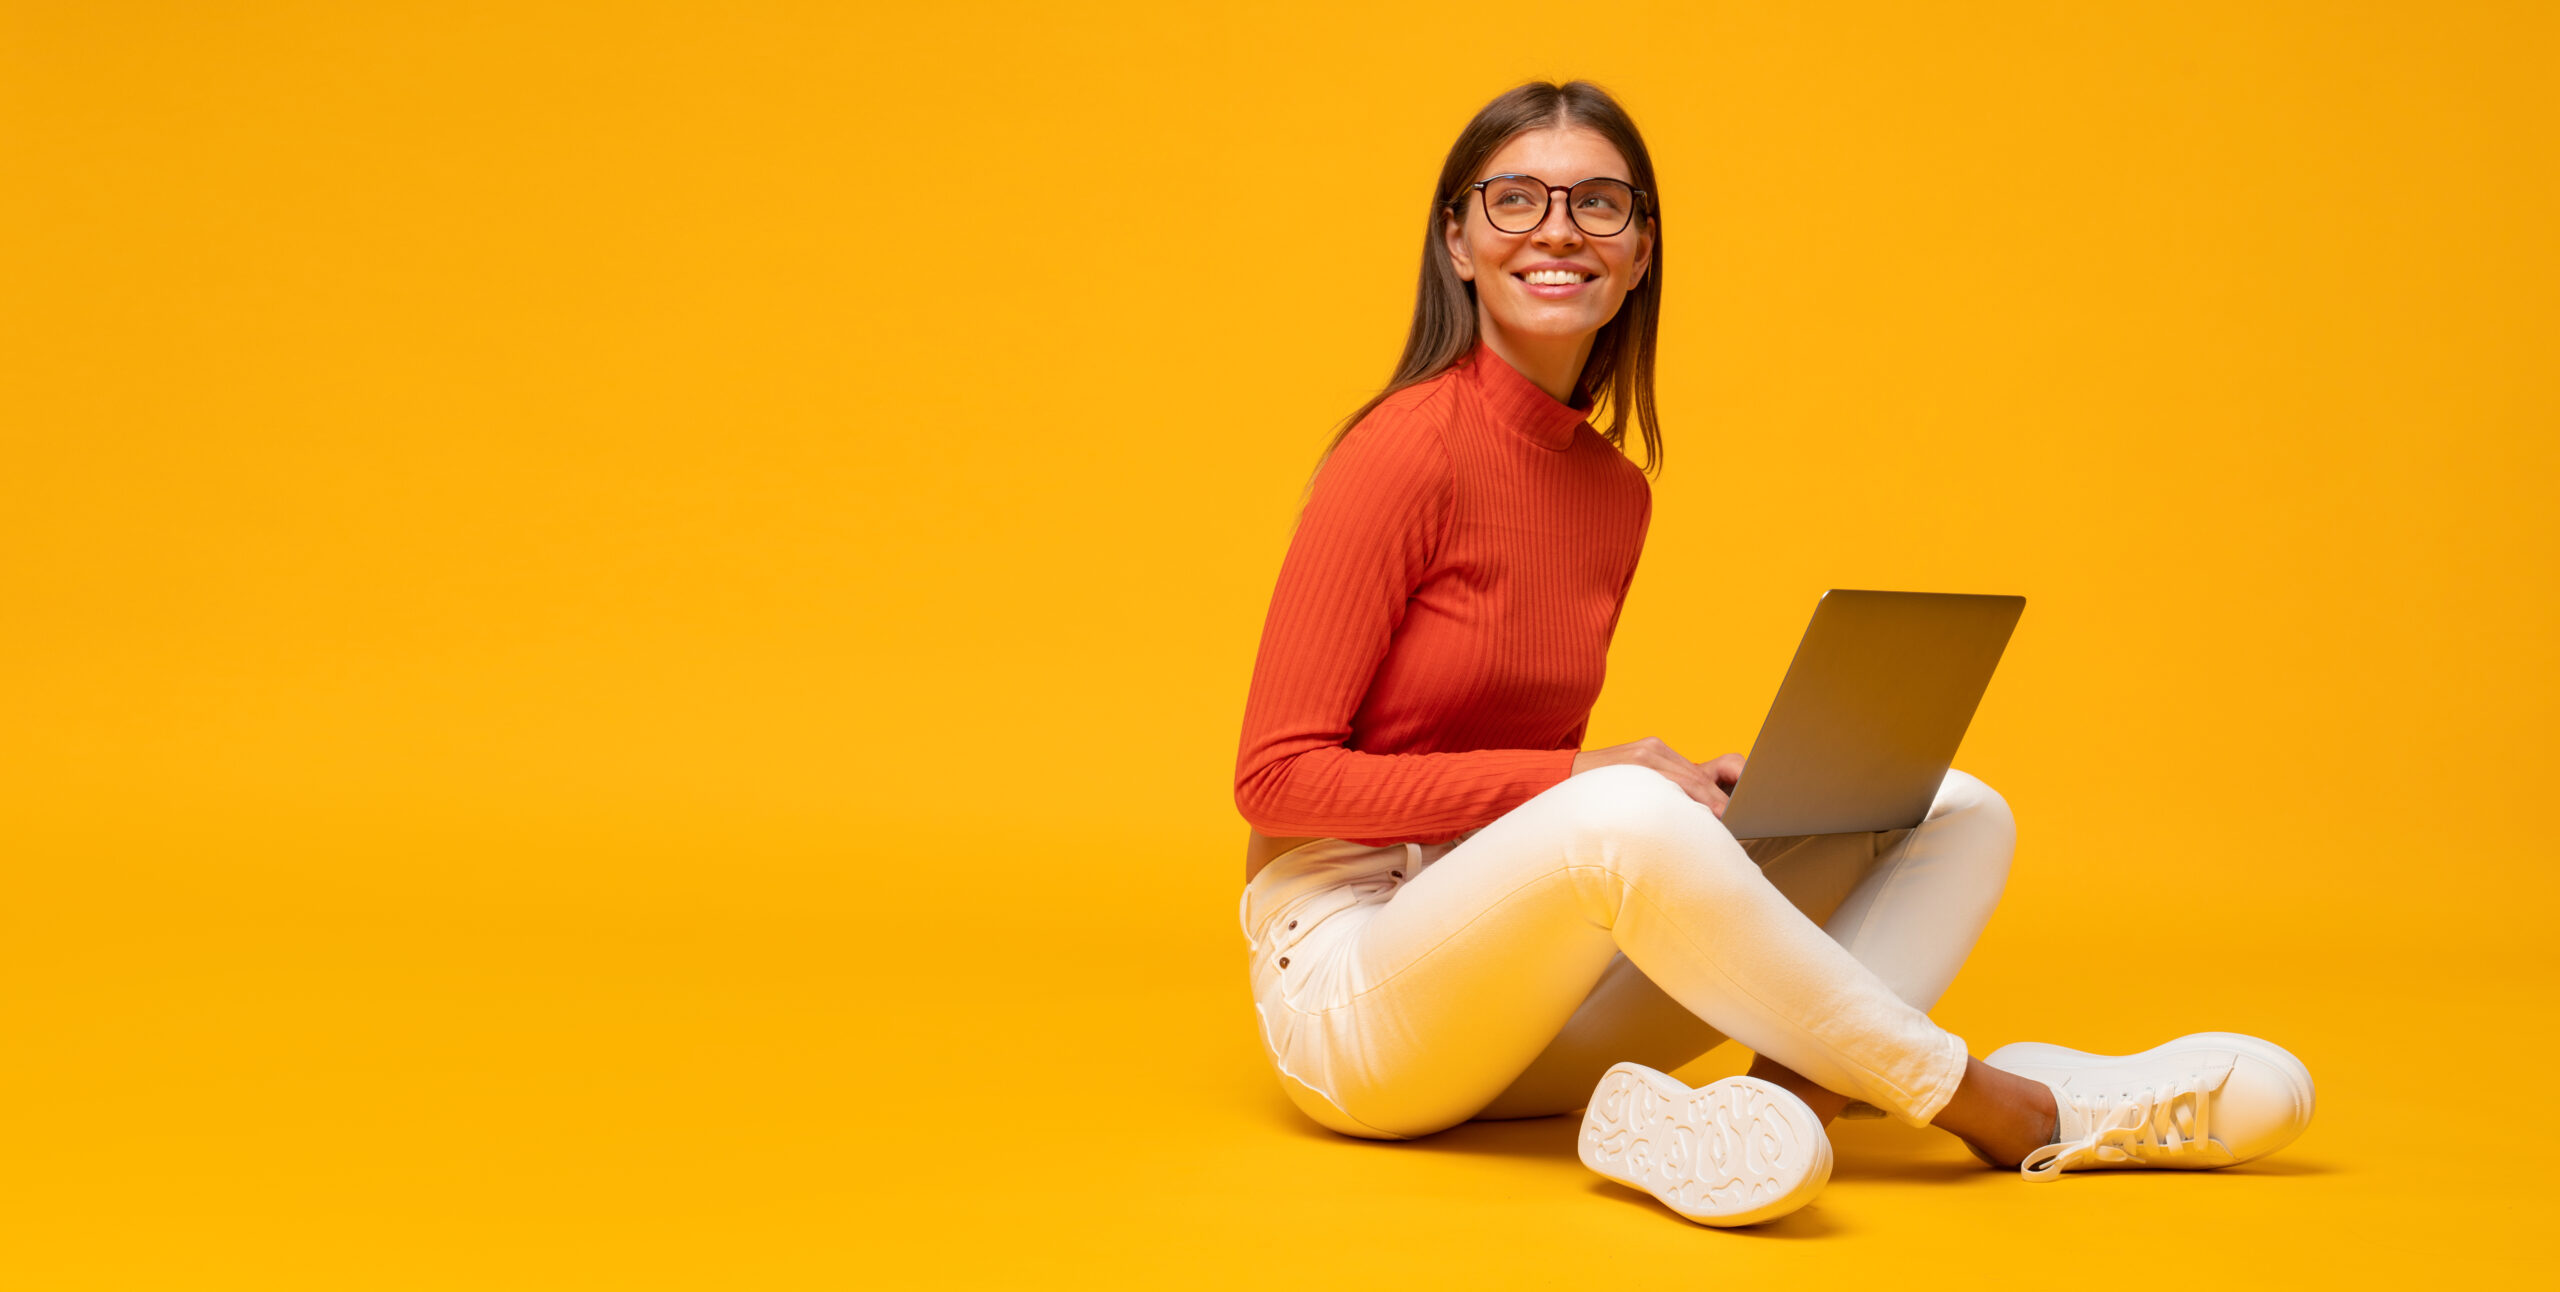 Banner of woman sitting on floor using laptop on yellow background with copy space on the right